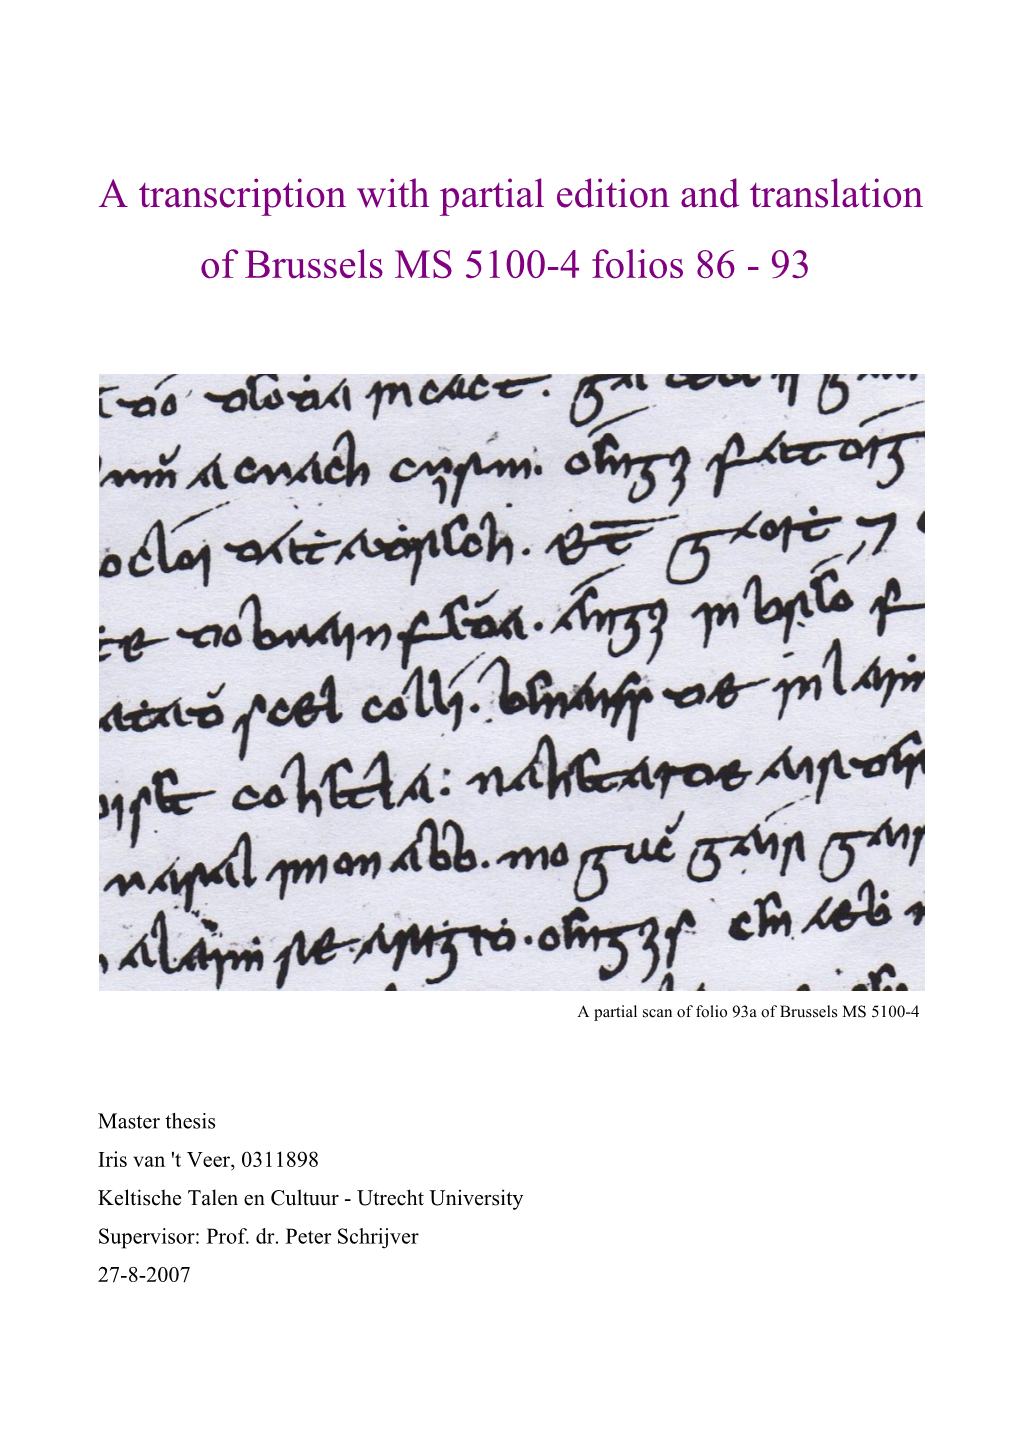 A Transcription with Partial Edition and Translation of Brussels MS 5100-4 Folios 86 - 93